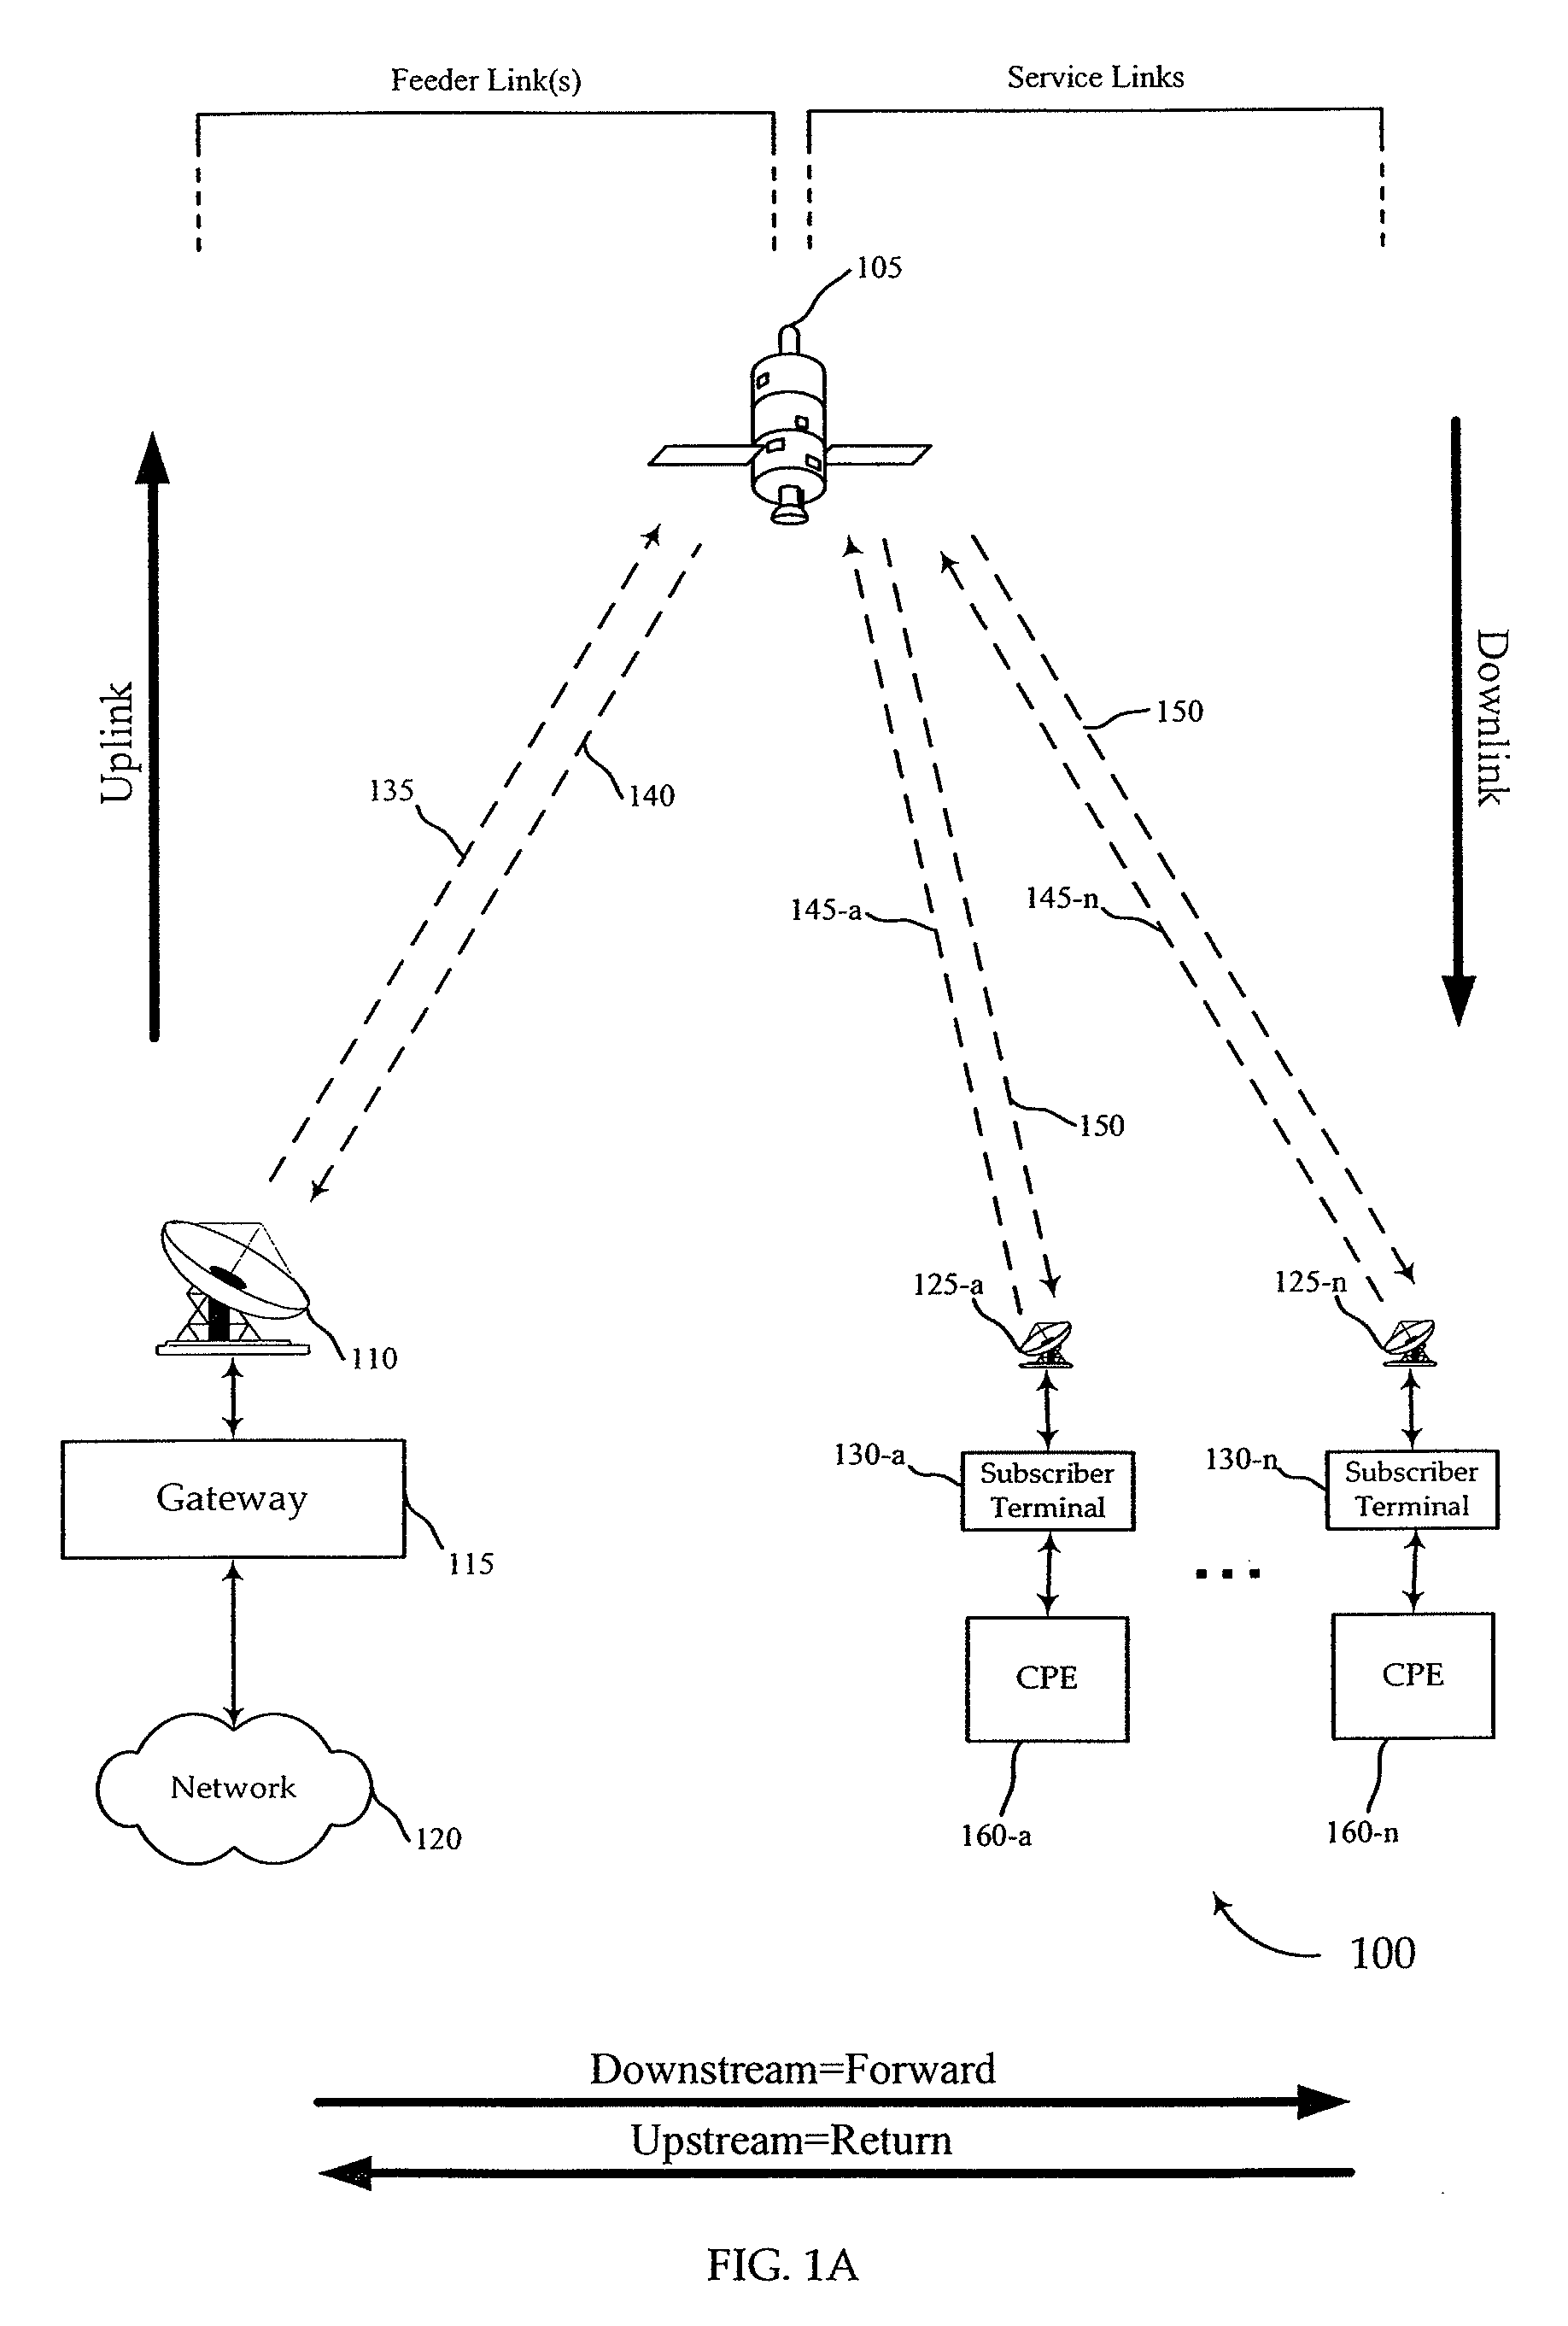 Web-bulk transfer preallocation of upstream resources in a satellite communication system